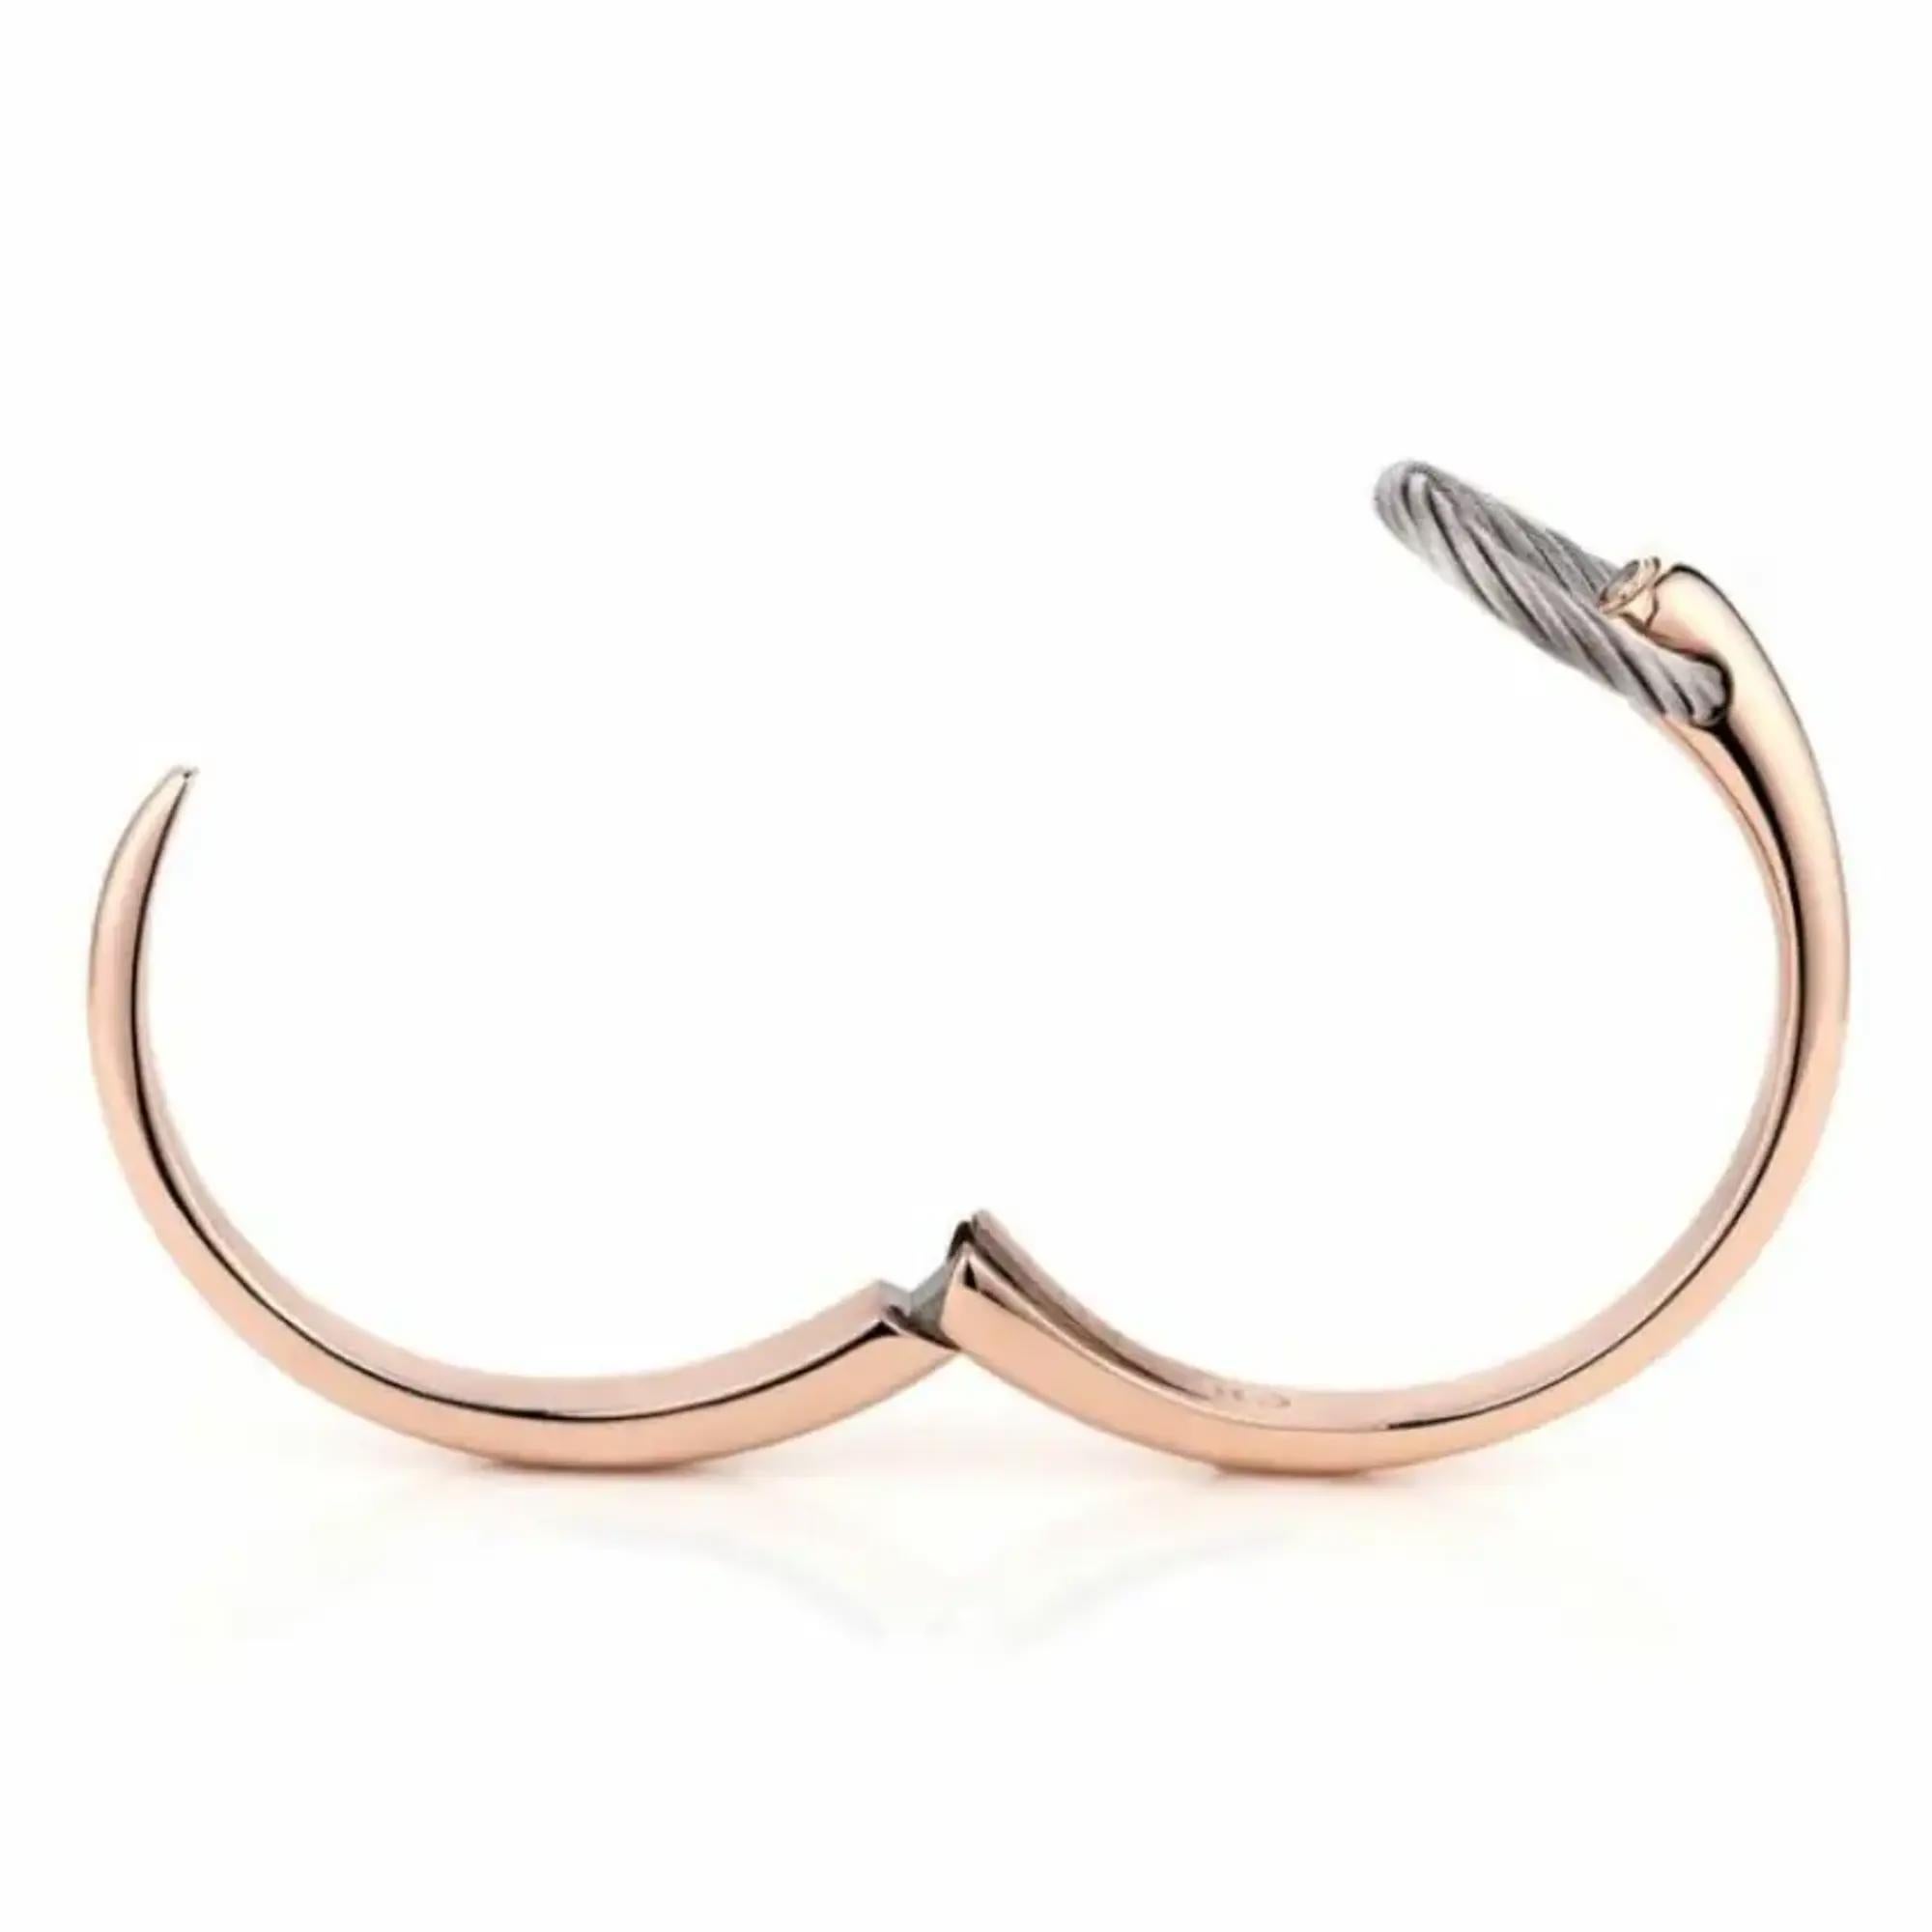 Modern Charriol Infinity Zen Rose Gold PVD Steel Cable Bangle 04-102-1232-0 Size M For Sale